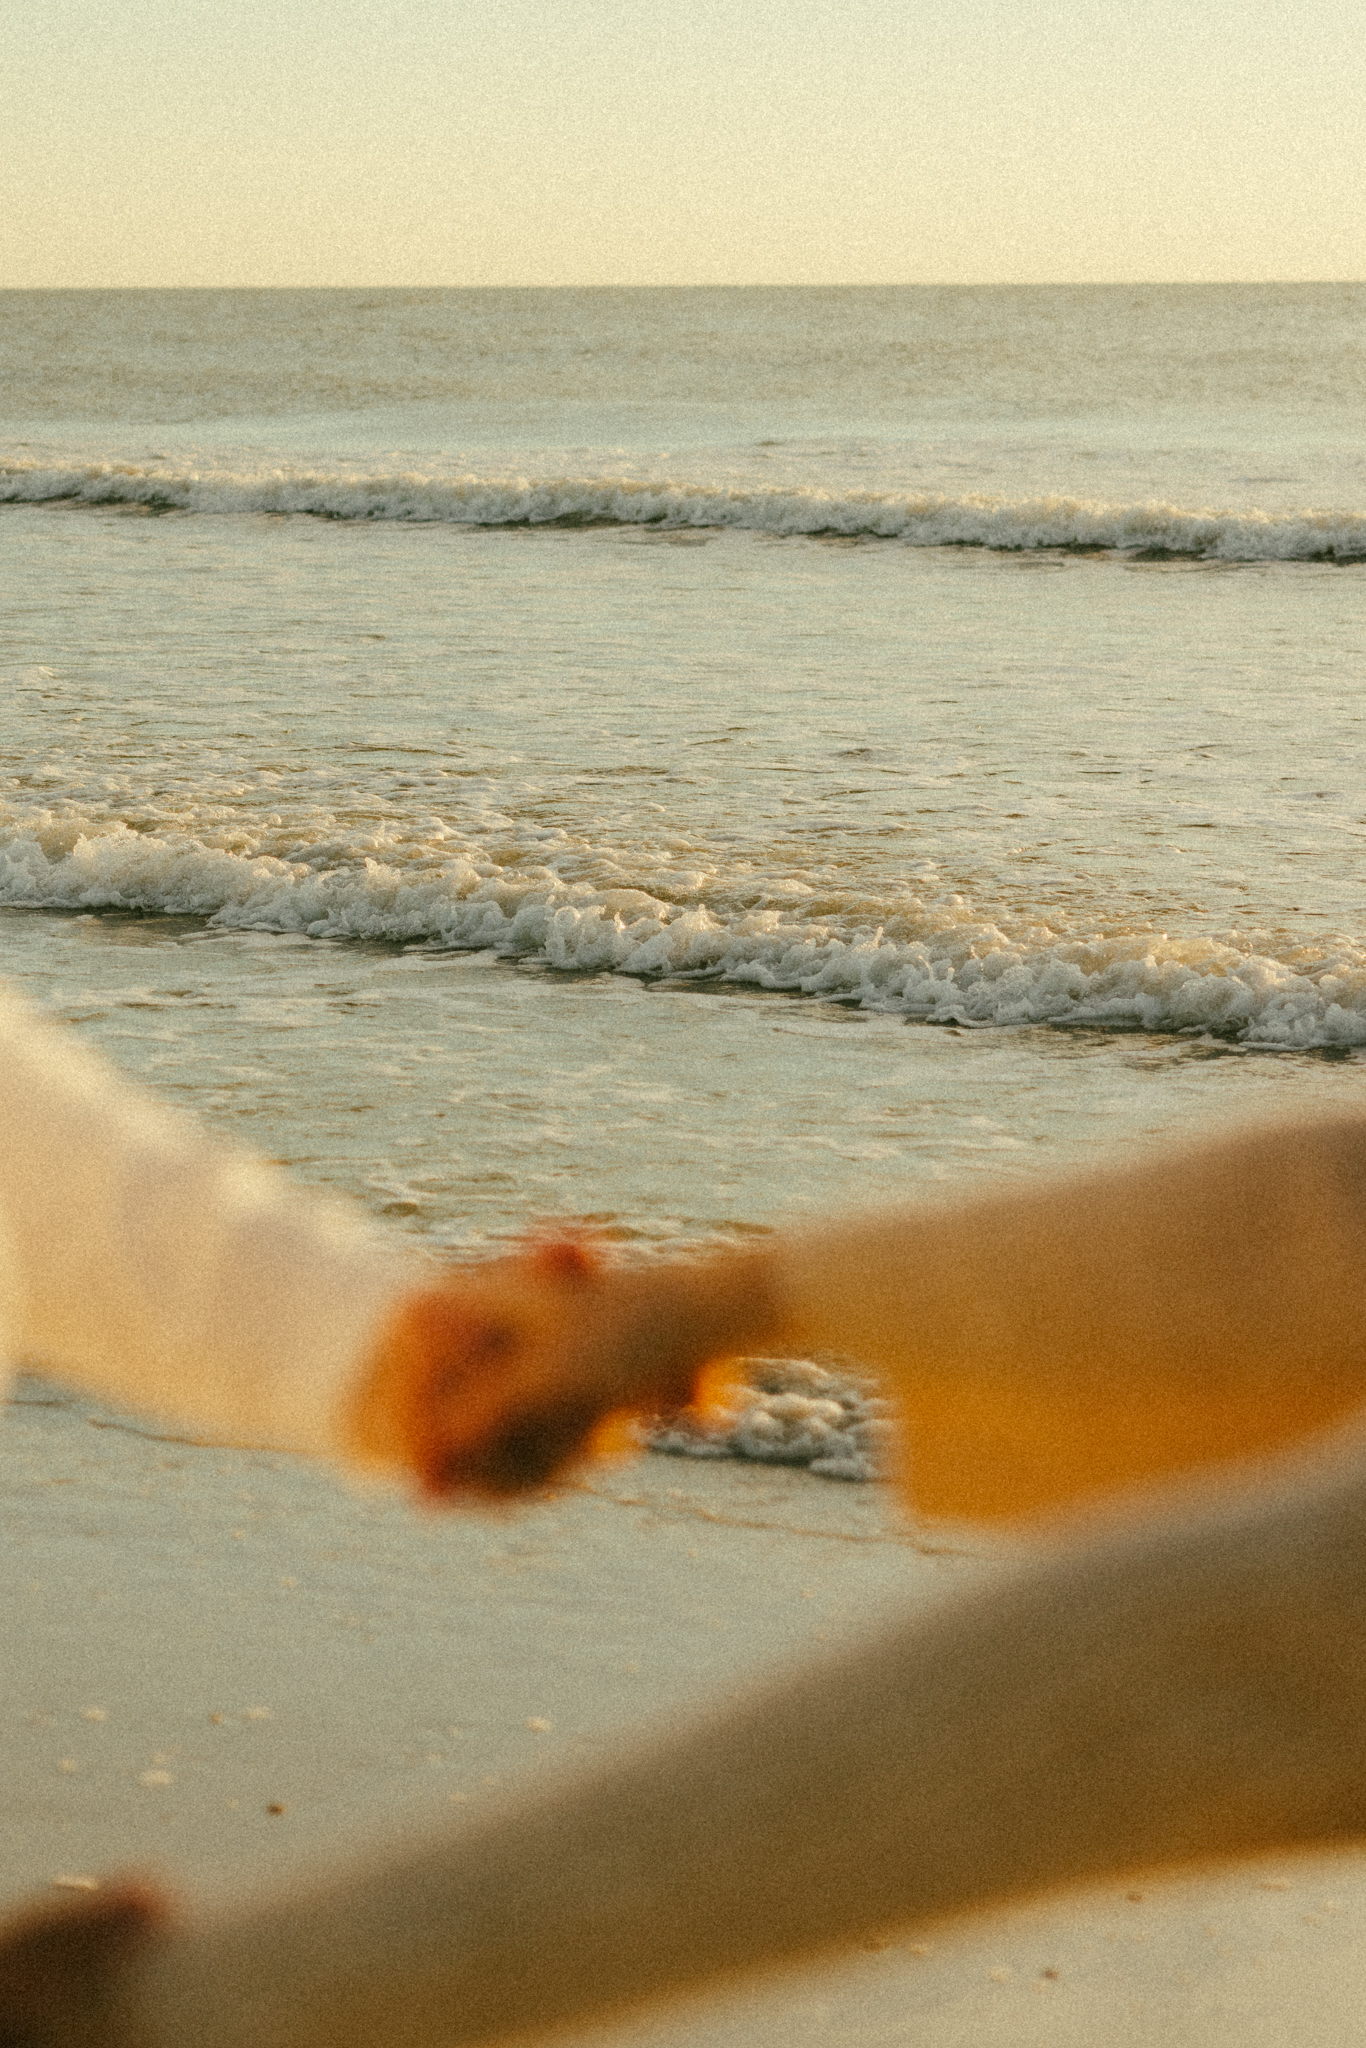 blurry hands in foreground with waves on the beach in focus. Documentary style photo